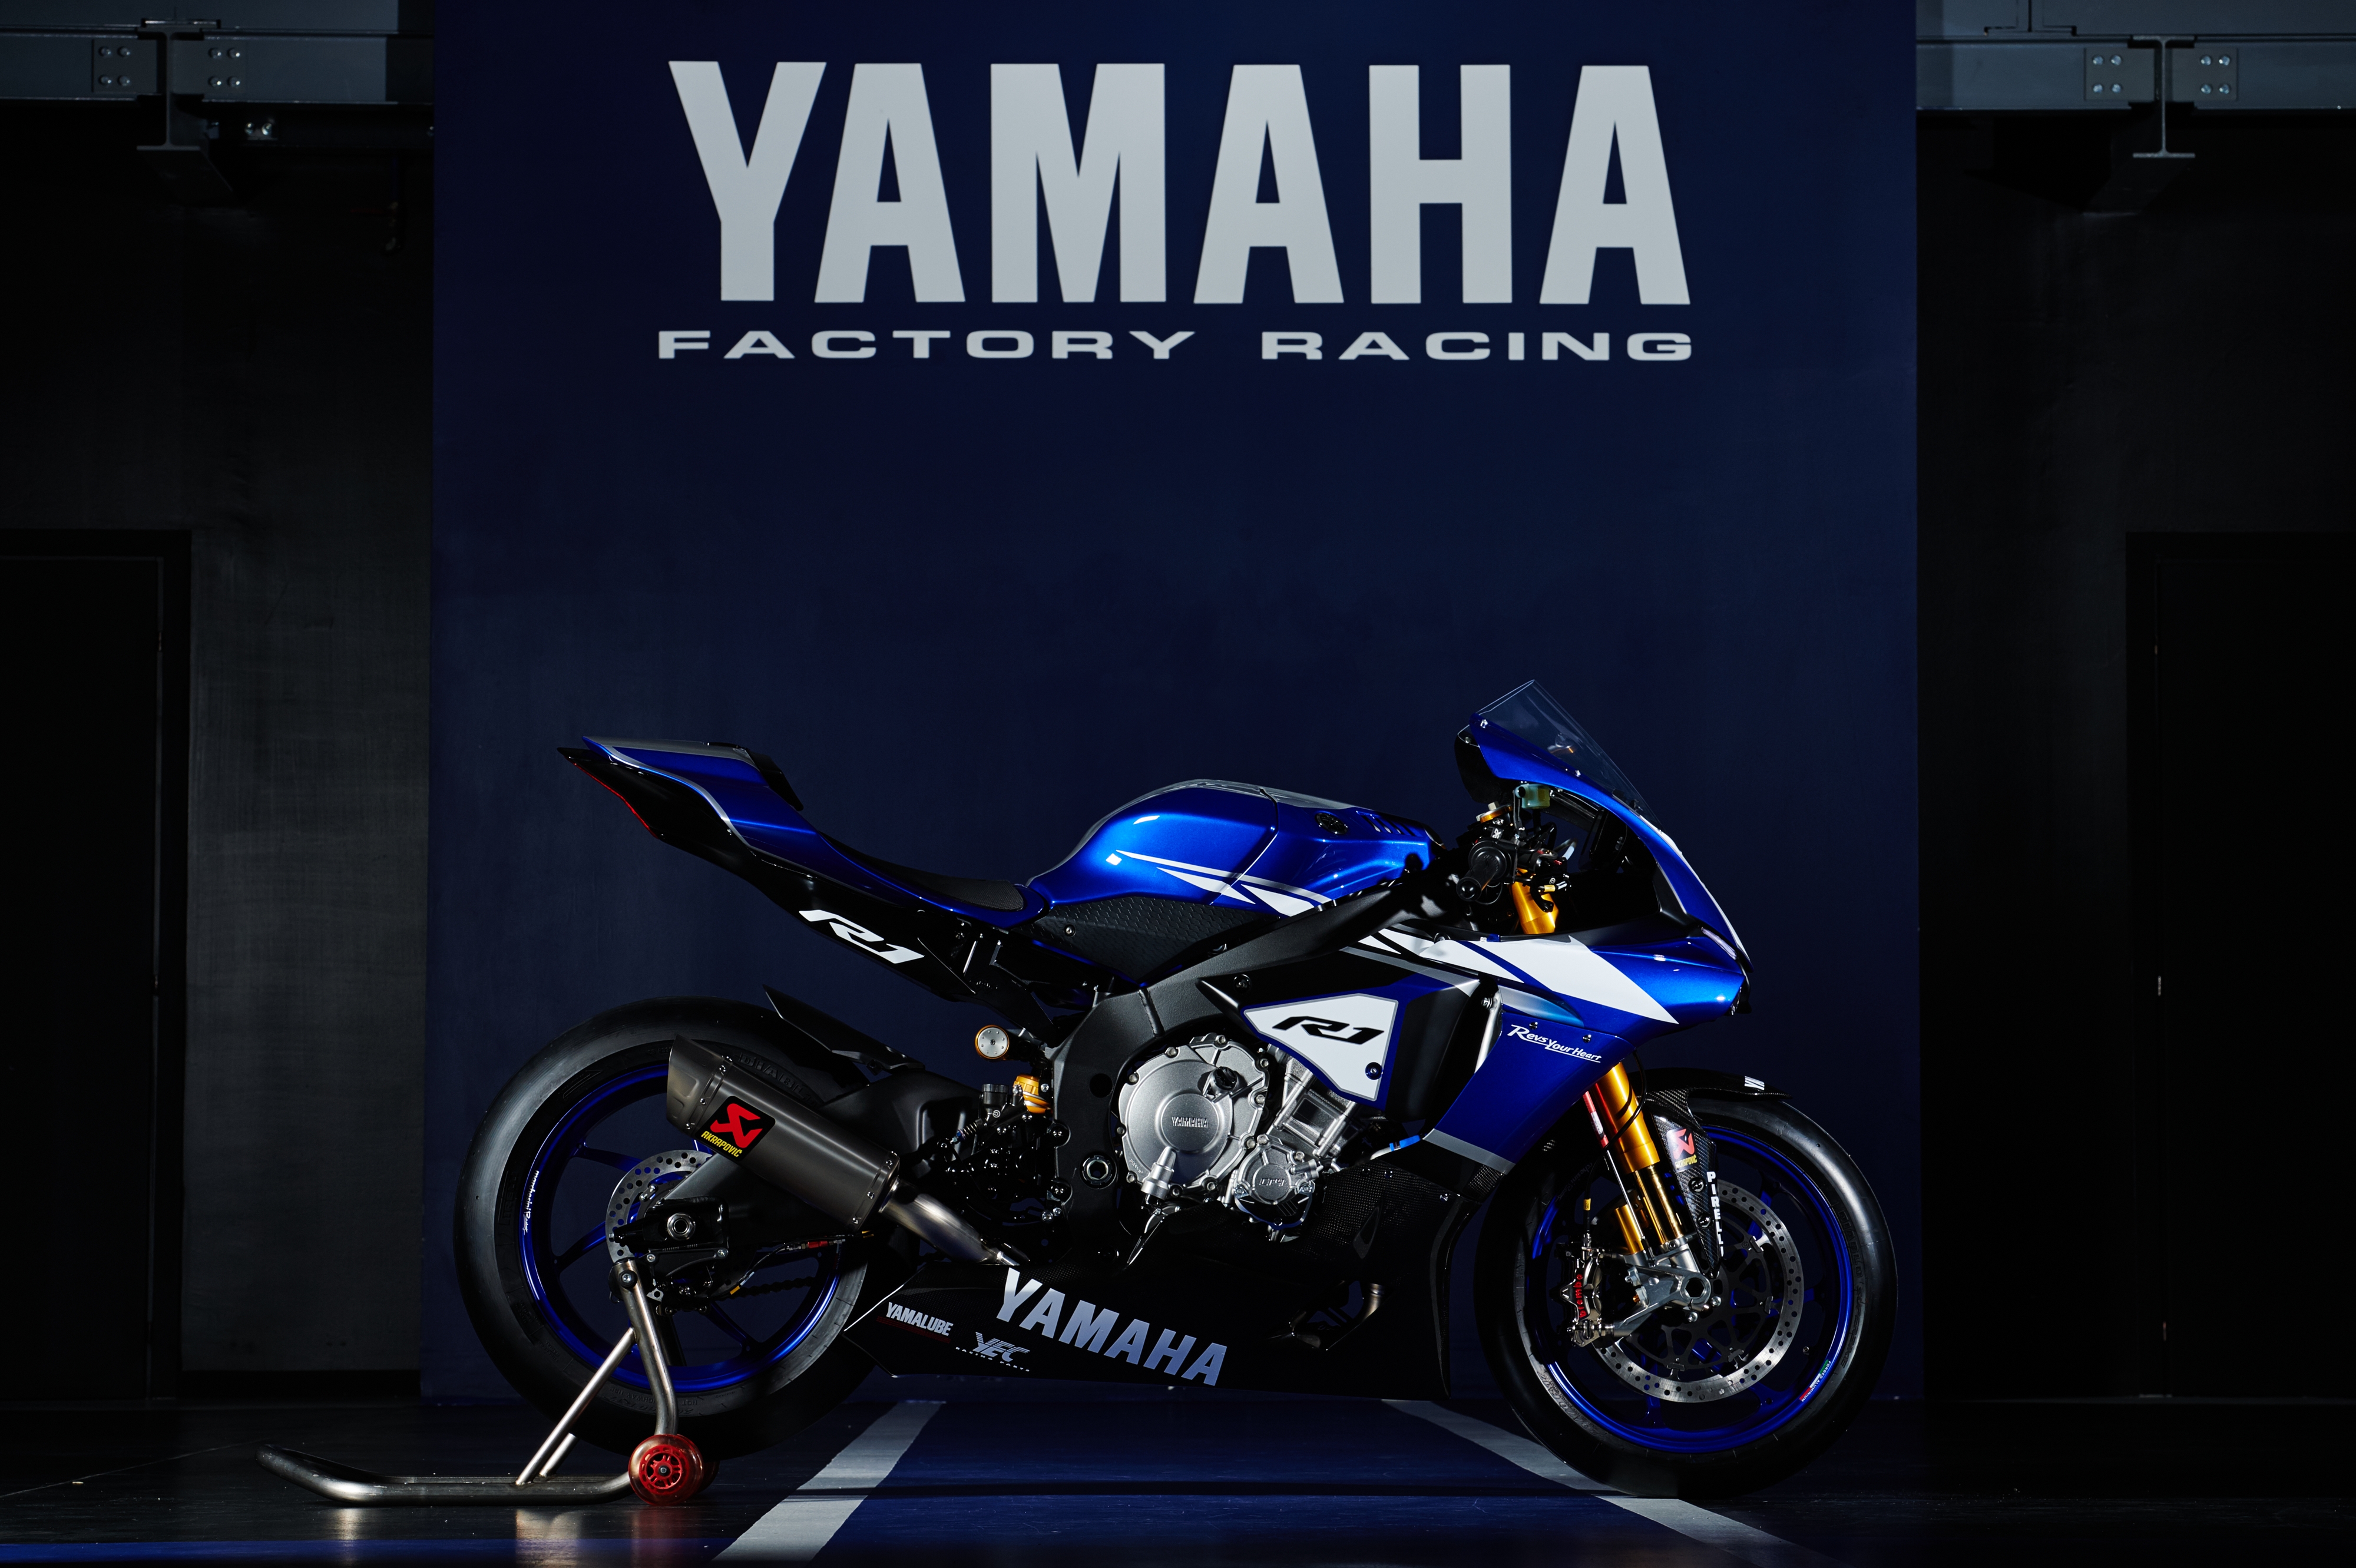 Yamaha to return to WSBK after five years